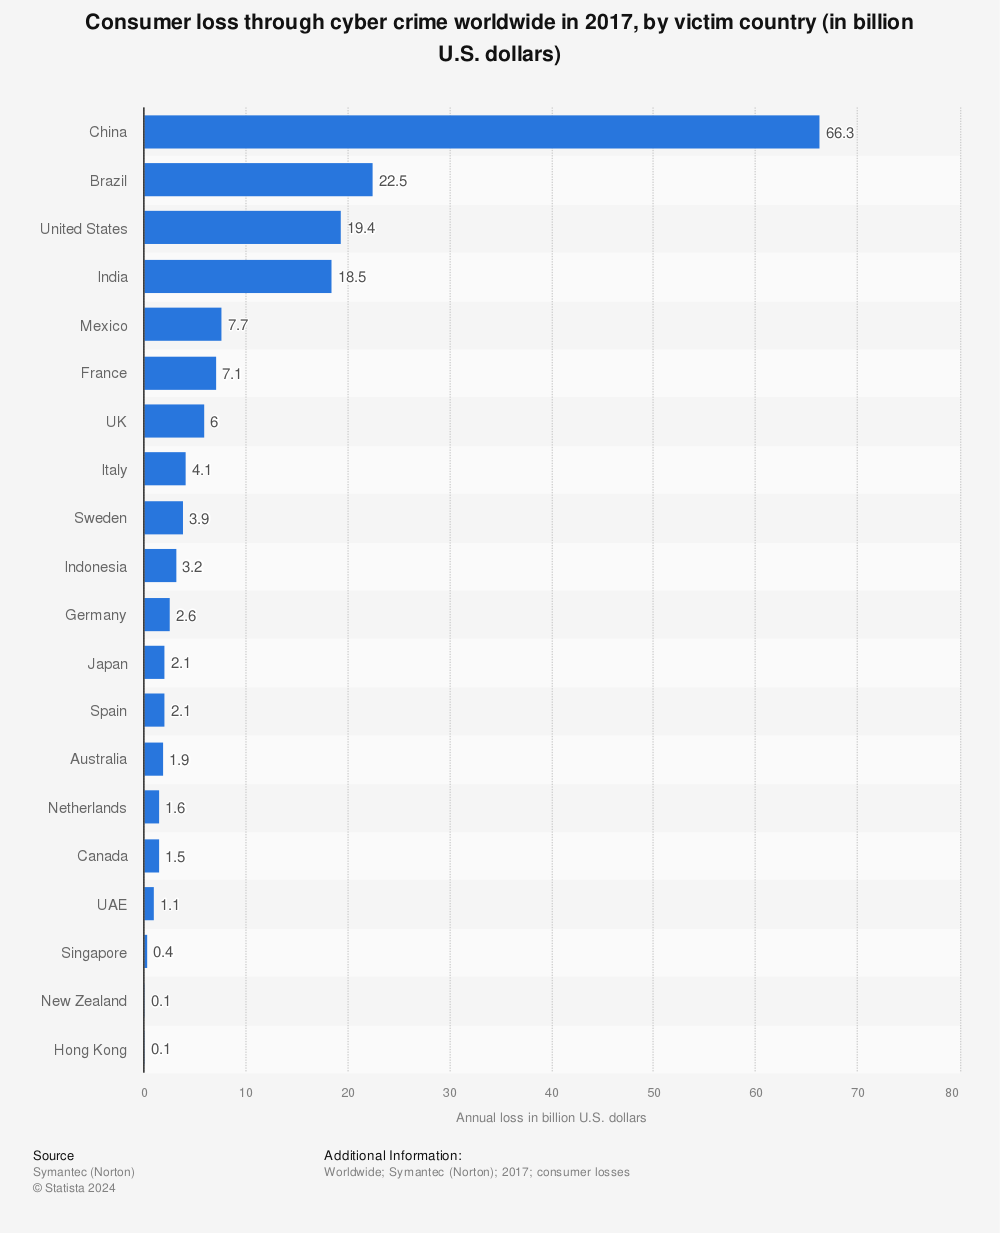 Statistic: Consumer loss through cyber crime worldwide in 2017, by victim country (in billion U.S. dollars) | Statista